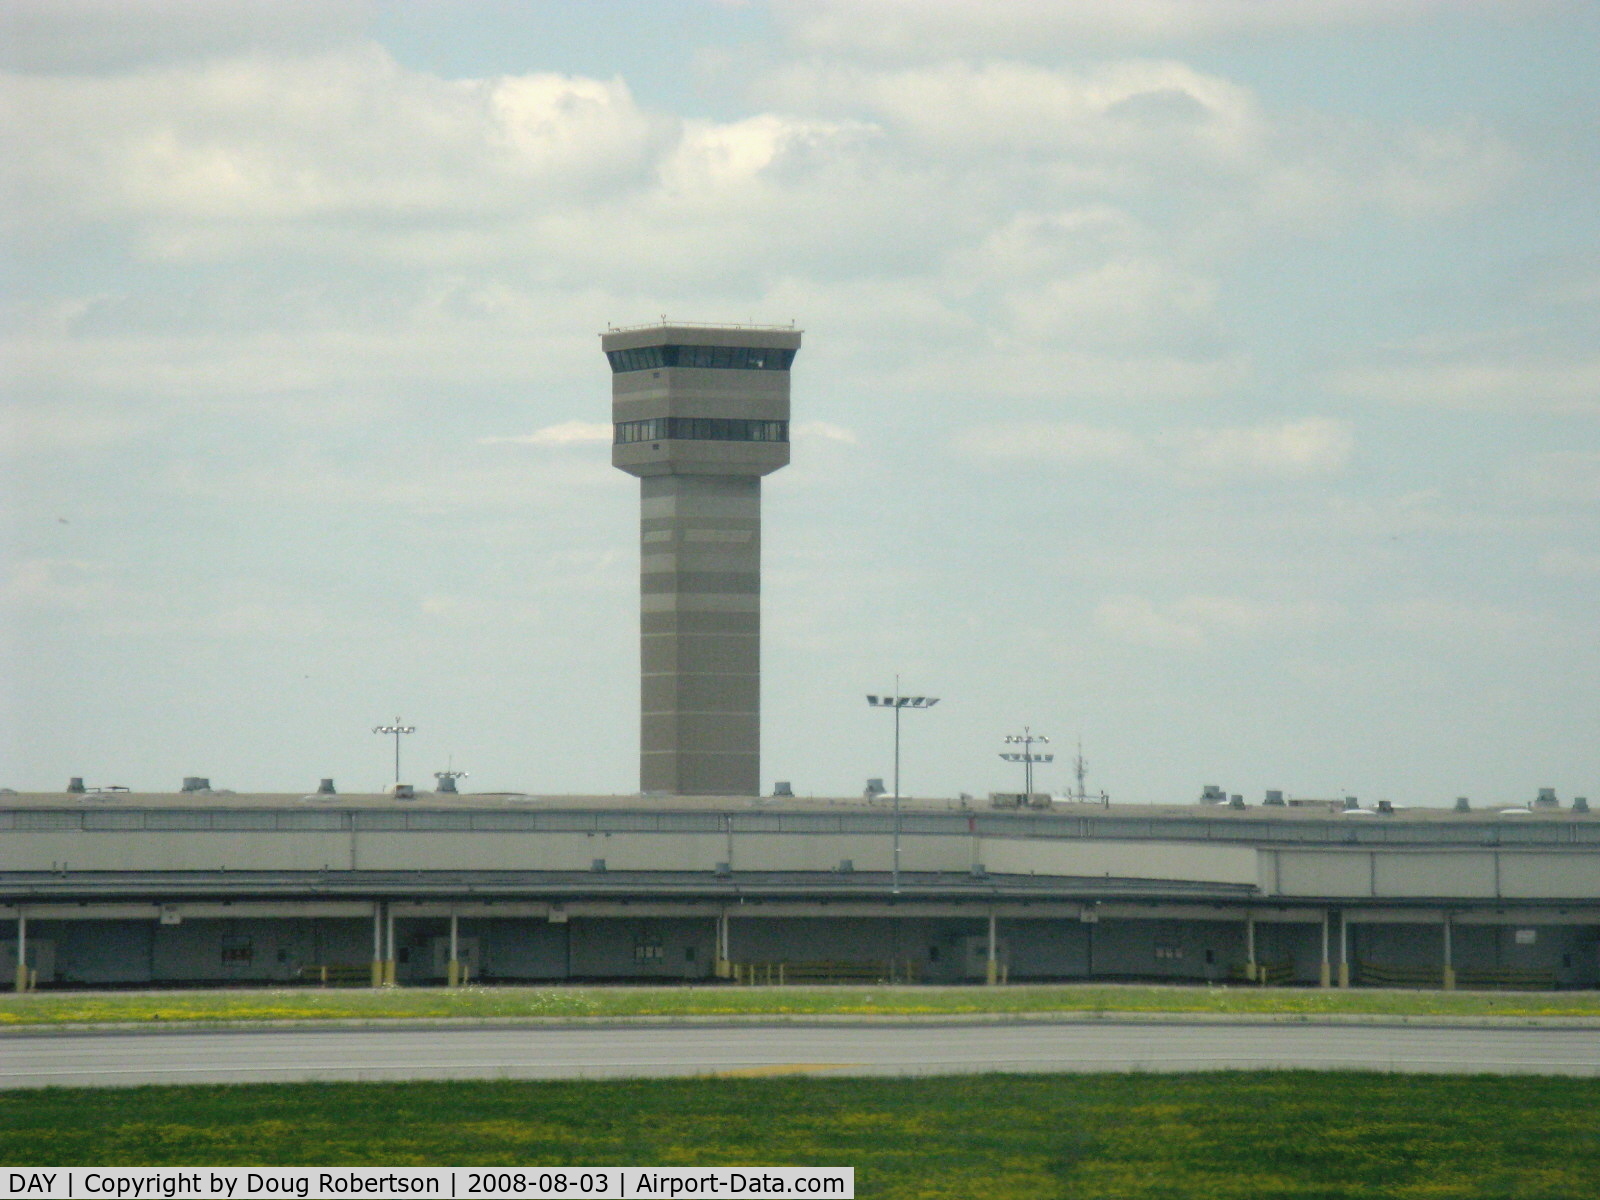 James M Cox Dayton International Airport (DAY) - Several towers on this airport-this is NOT the Air Traffic Control Tower.